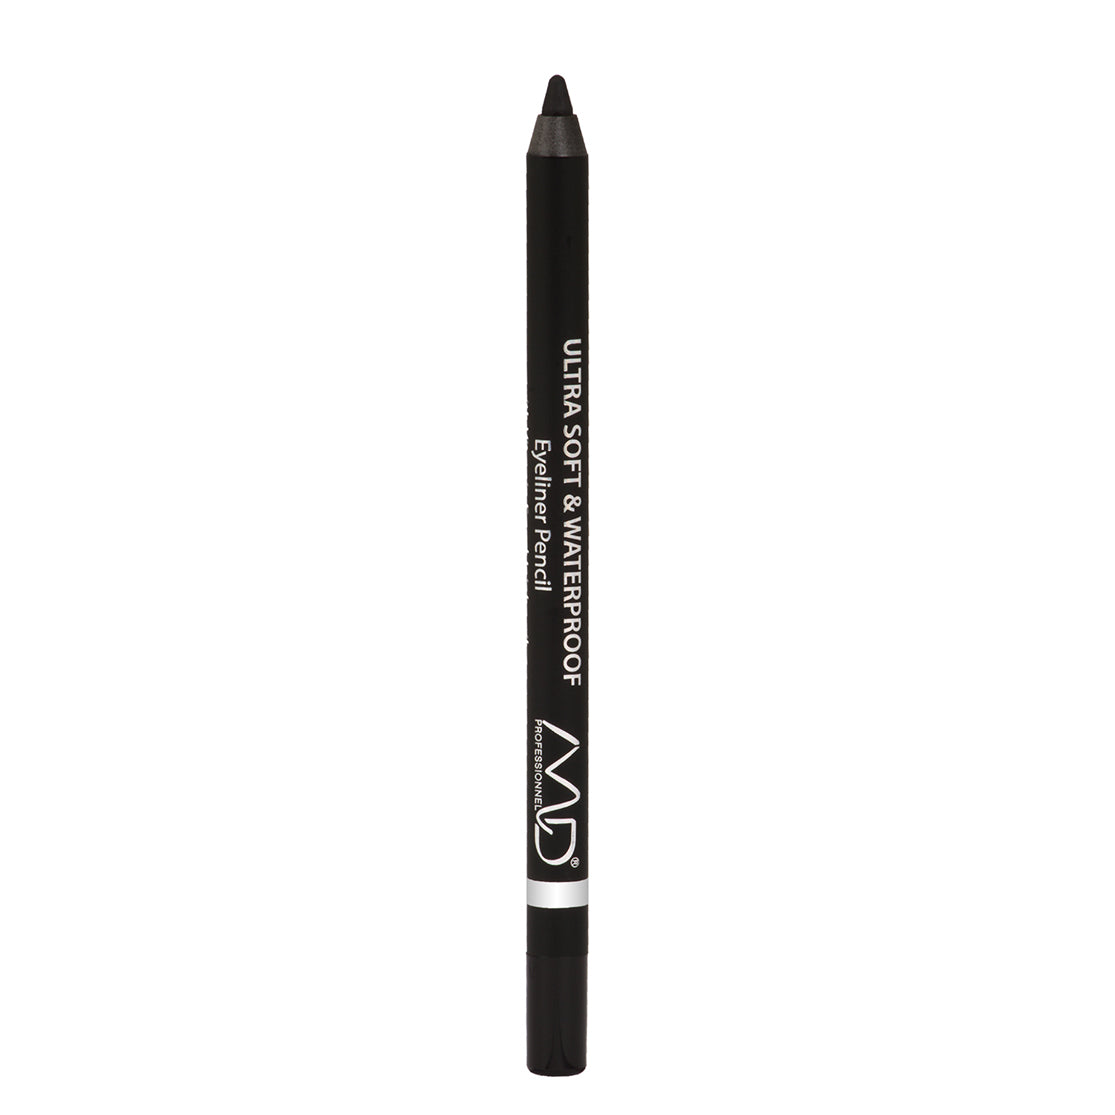 MD Professionnel Ultra Soft and Waterproof Eyeliner Pencil